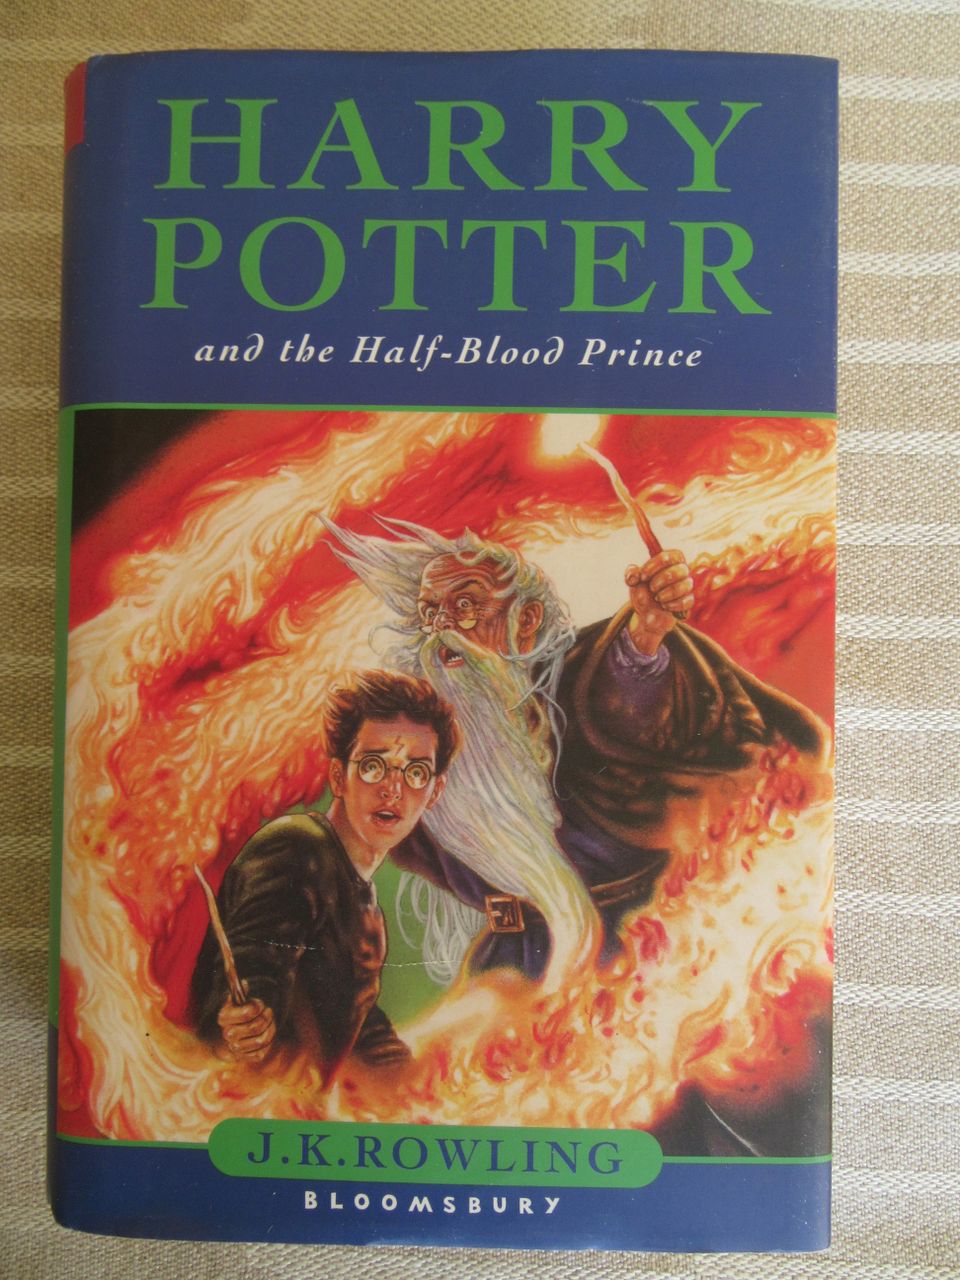 J.K.Rowling: HARRY POTTER and the Half-Blood Prince